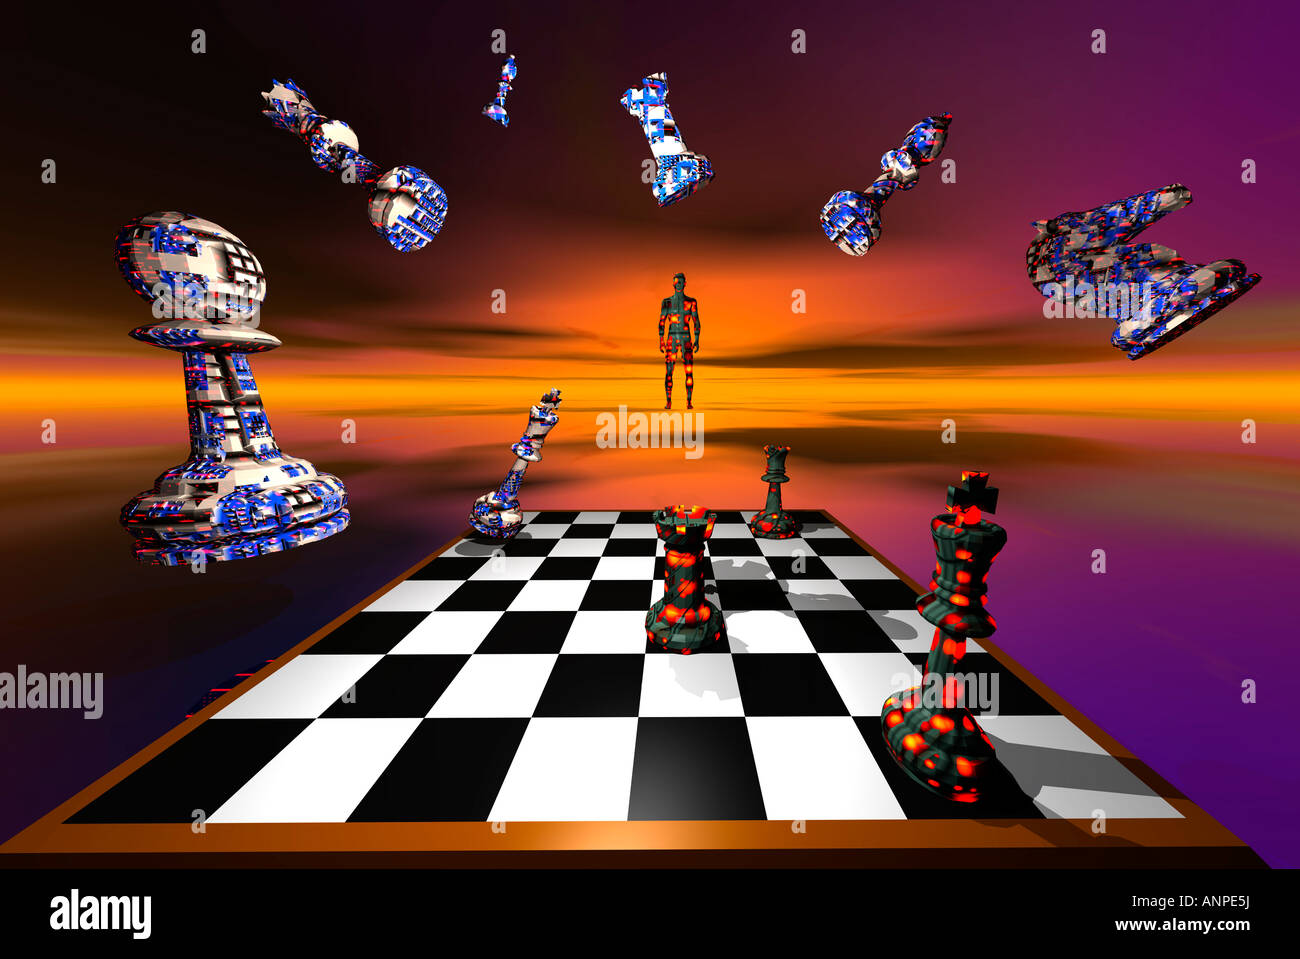 A 3D Conceptual Image Of A Computerized Game Of Chess. Stock Photo